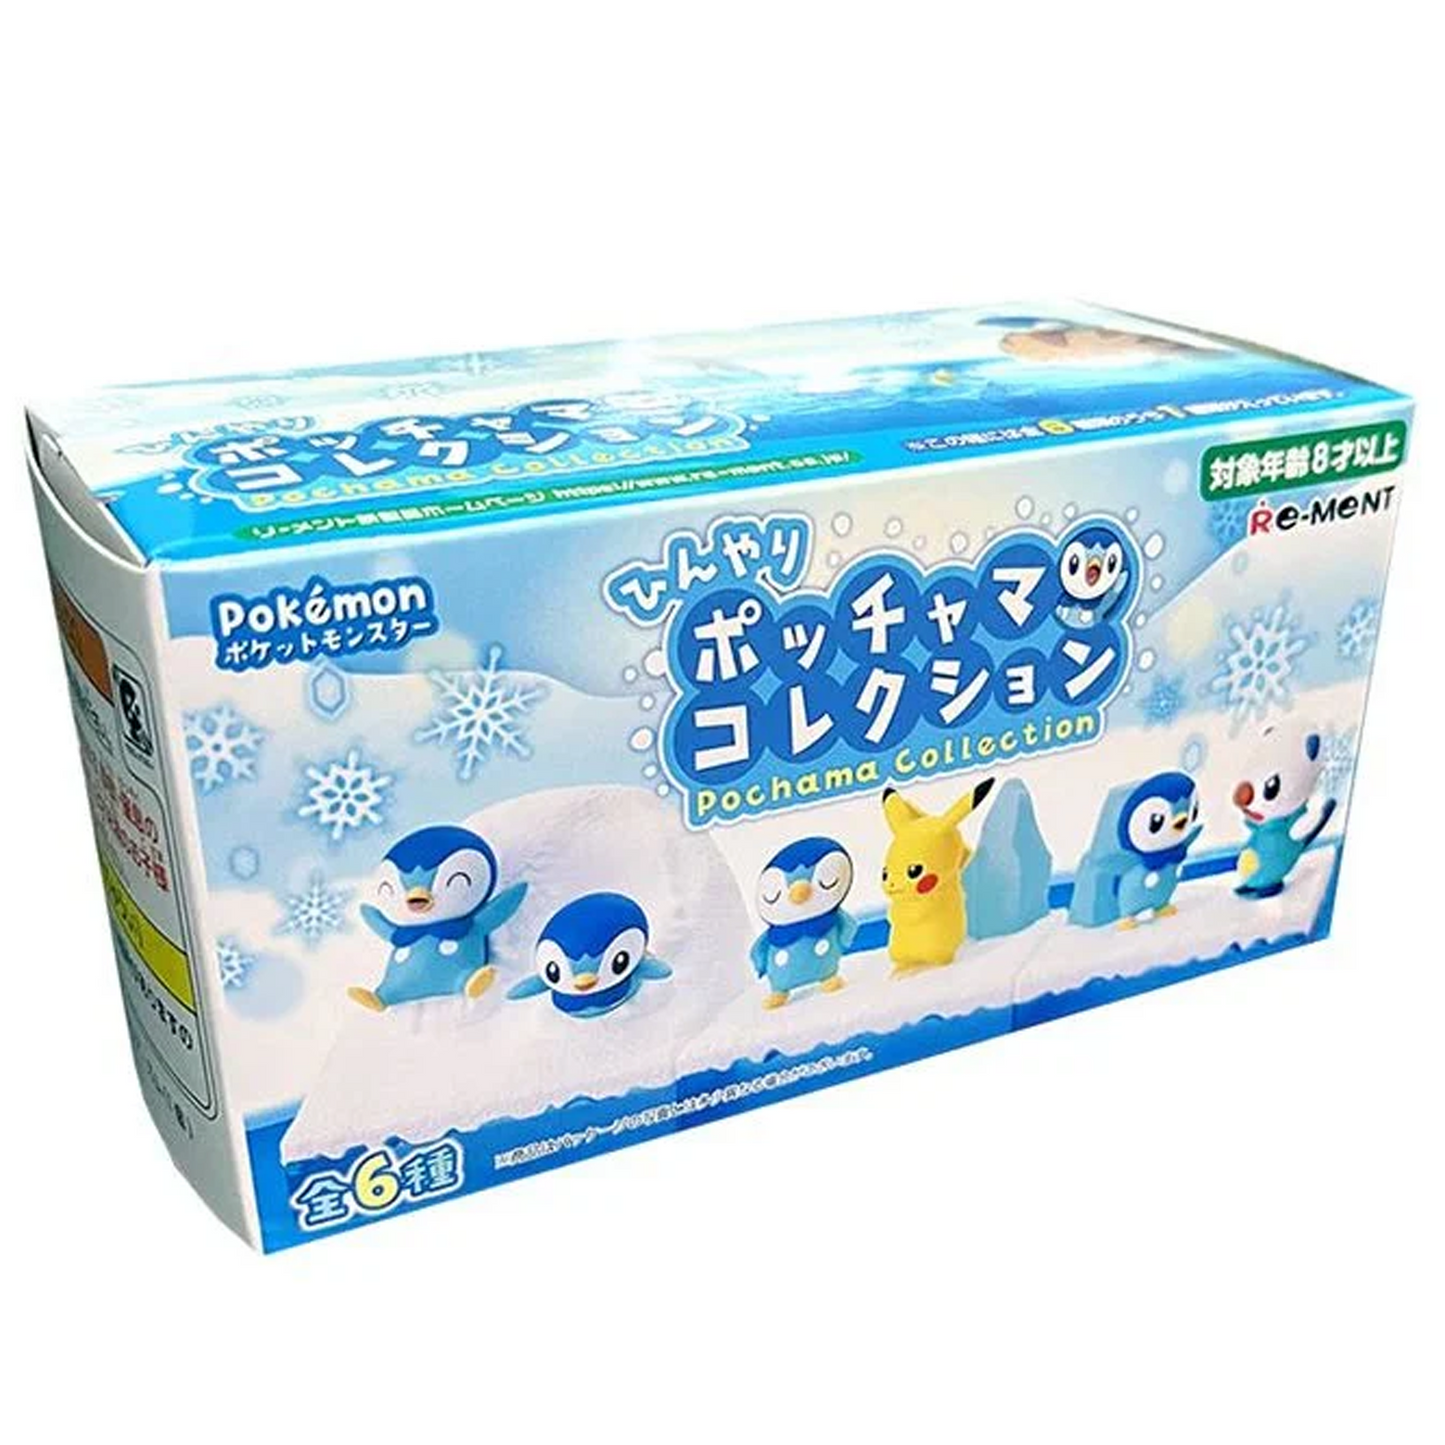 Re-Ment Piplup (Pochama) Collection Pokémon Blind Box (Boxed) | Happy Piranha